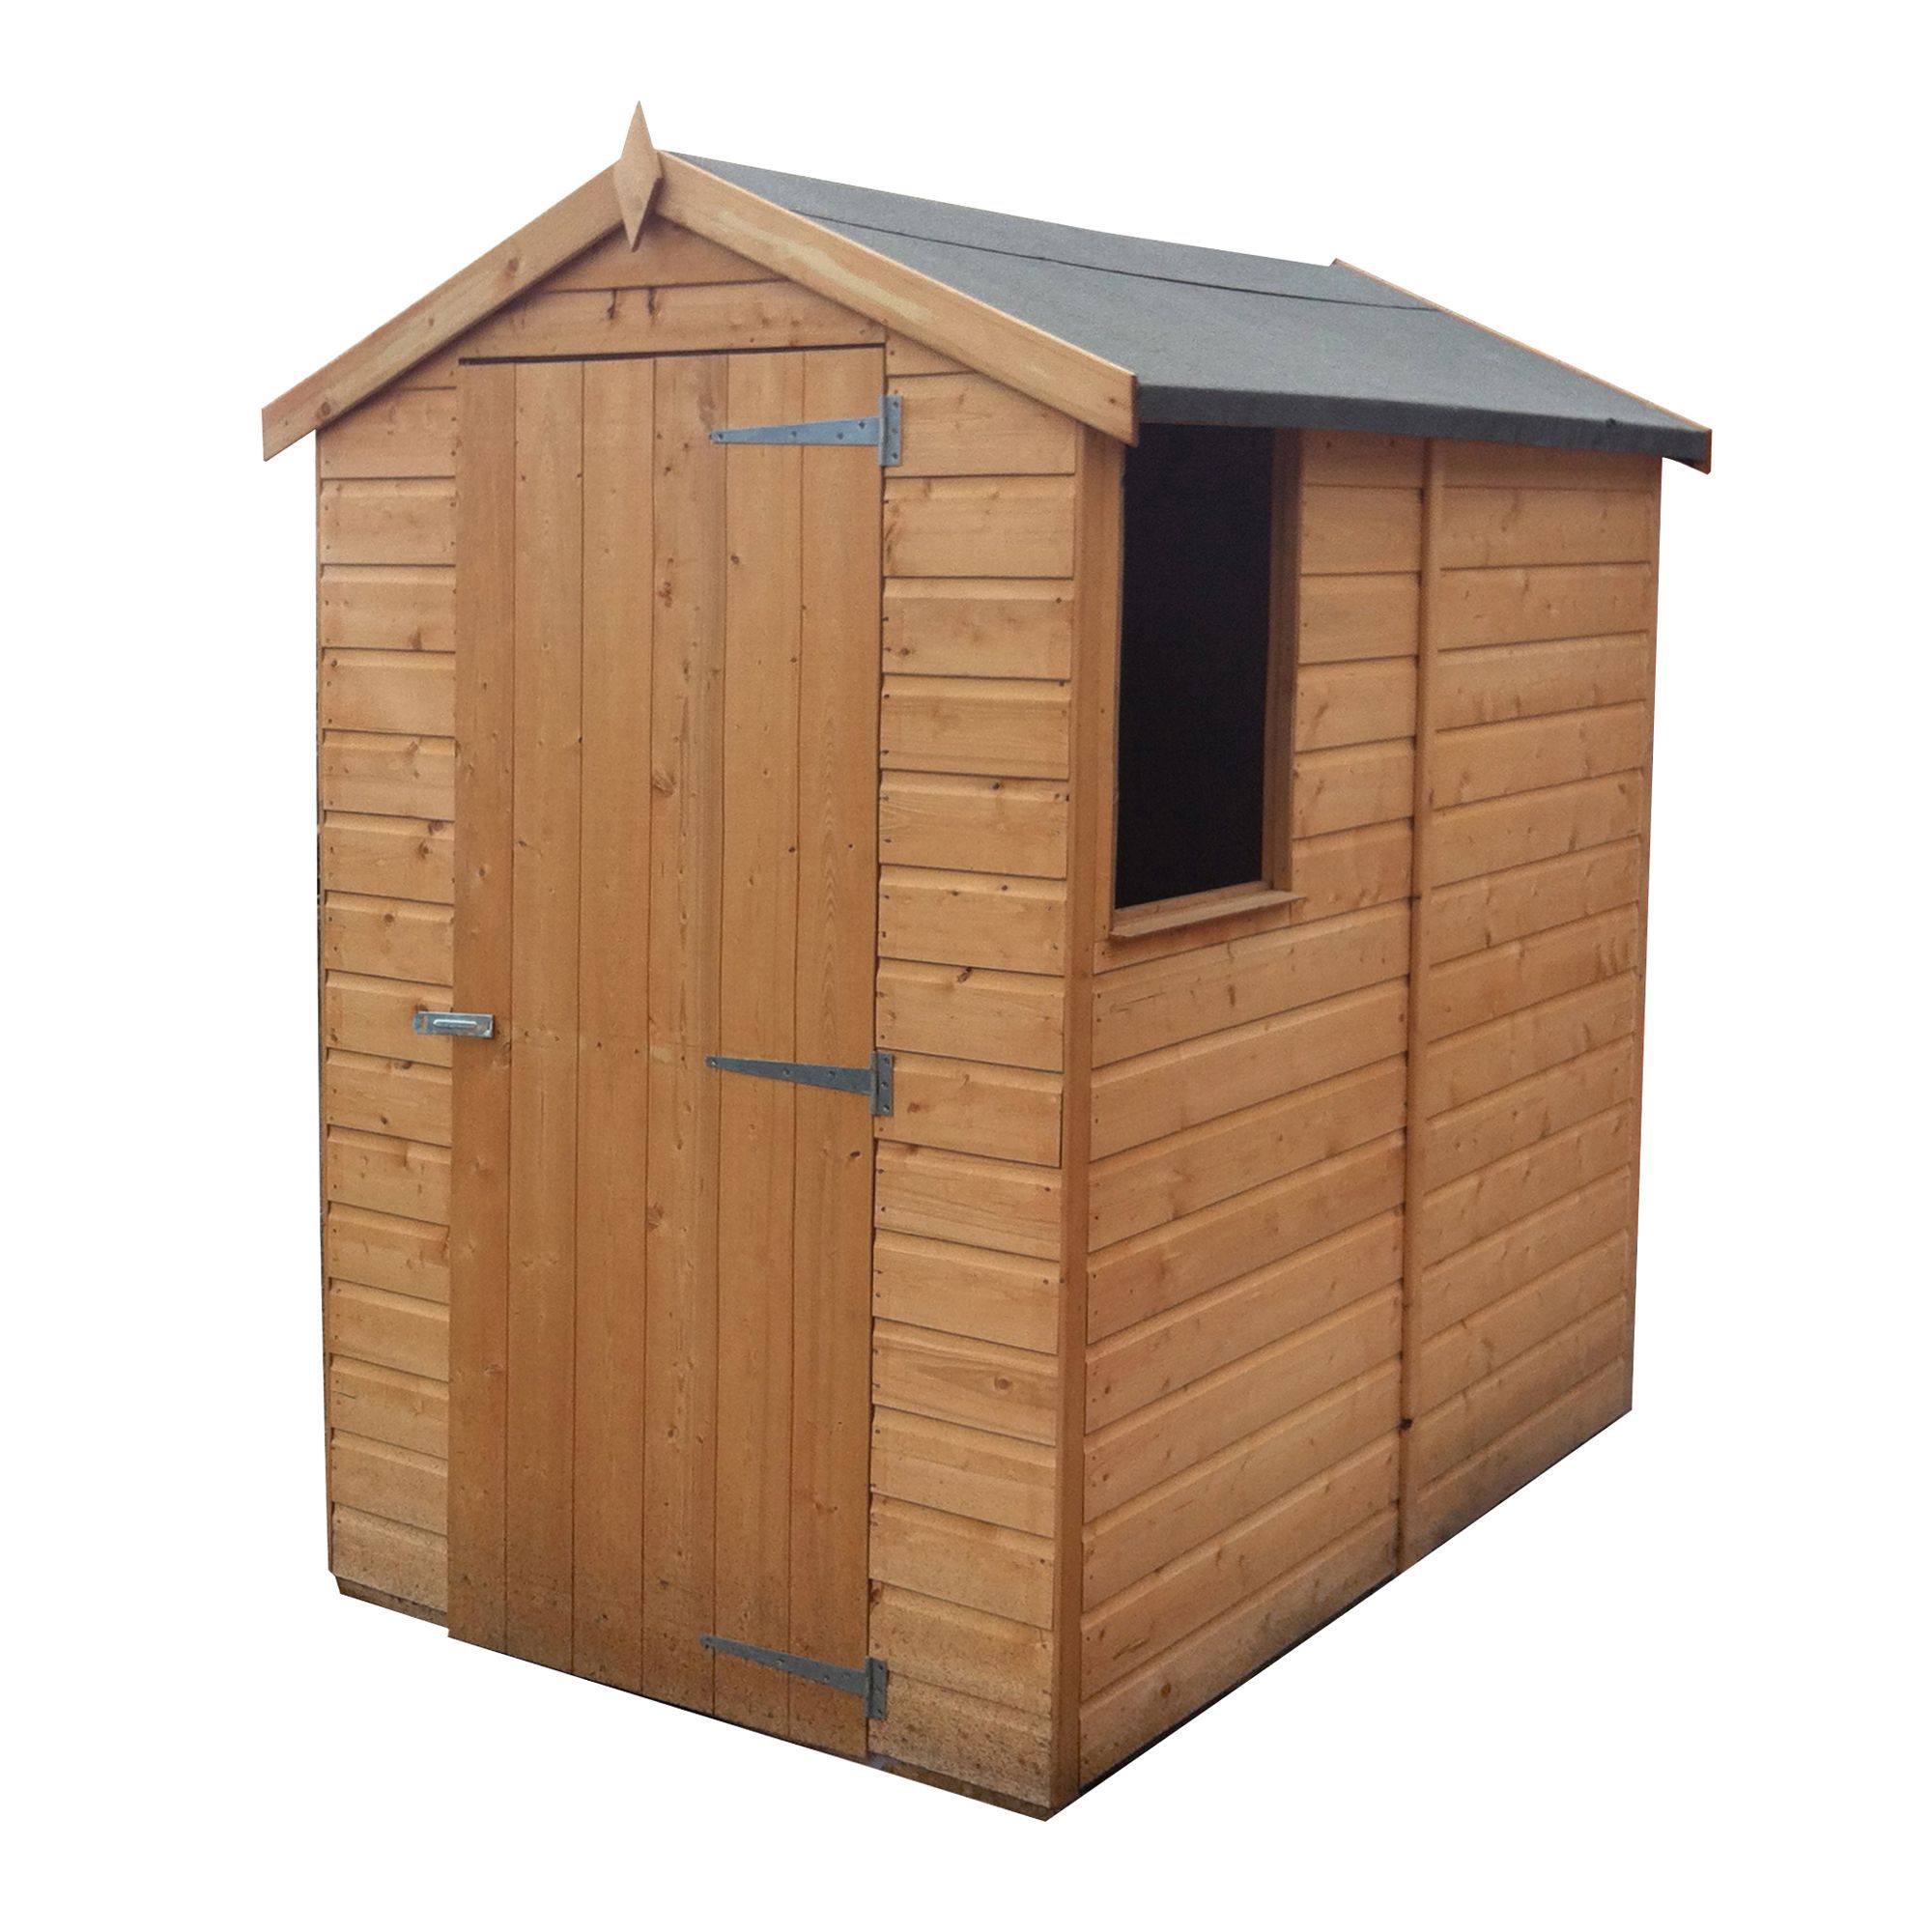 Shire Shetland 6x4 ft Apex Wooden Shed with floor & 1 window (Base included) - Assembly service included